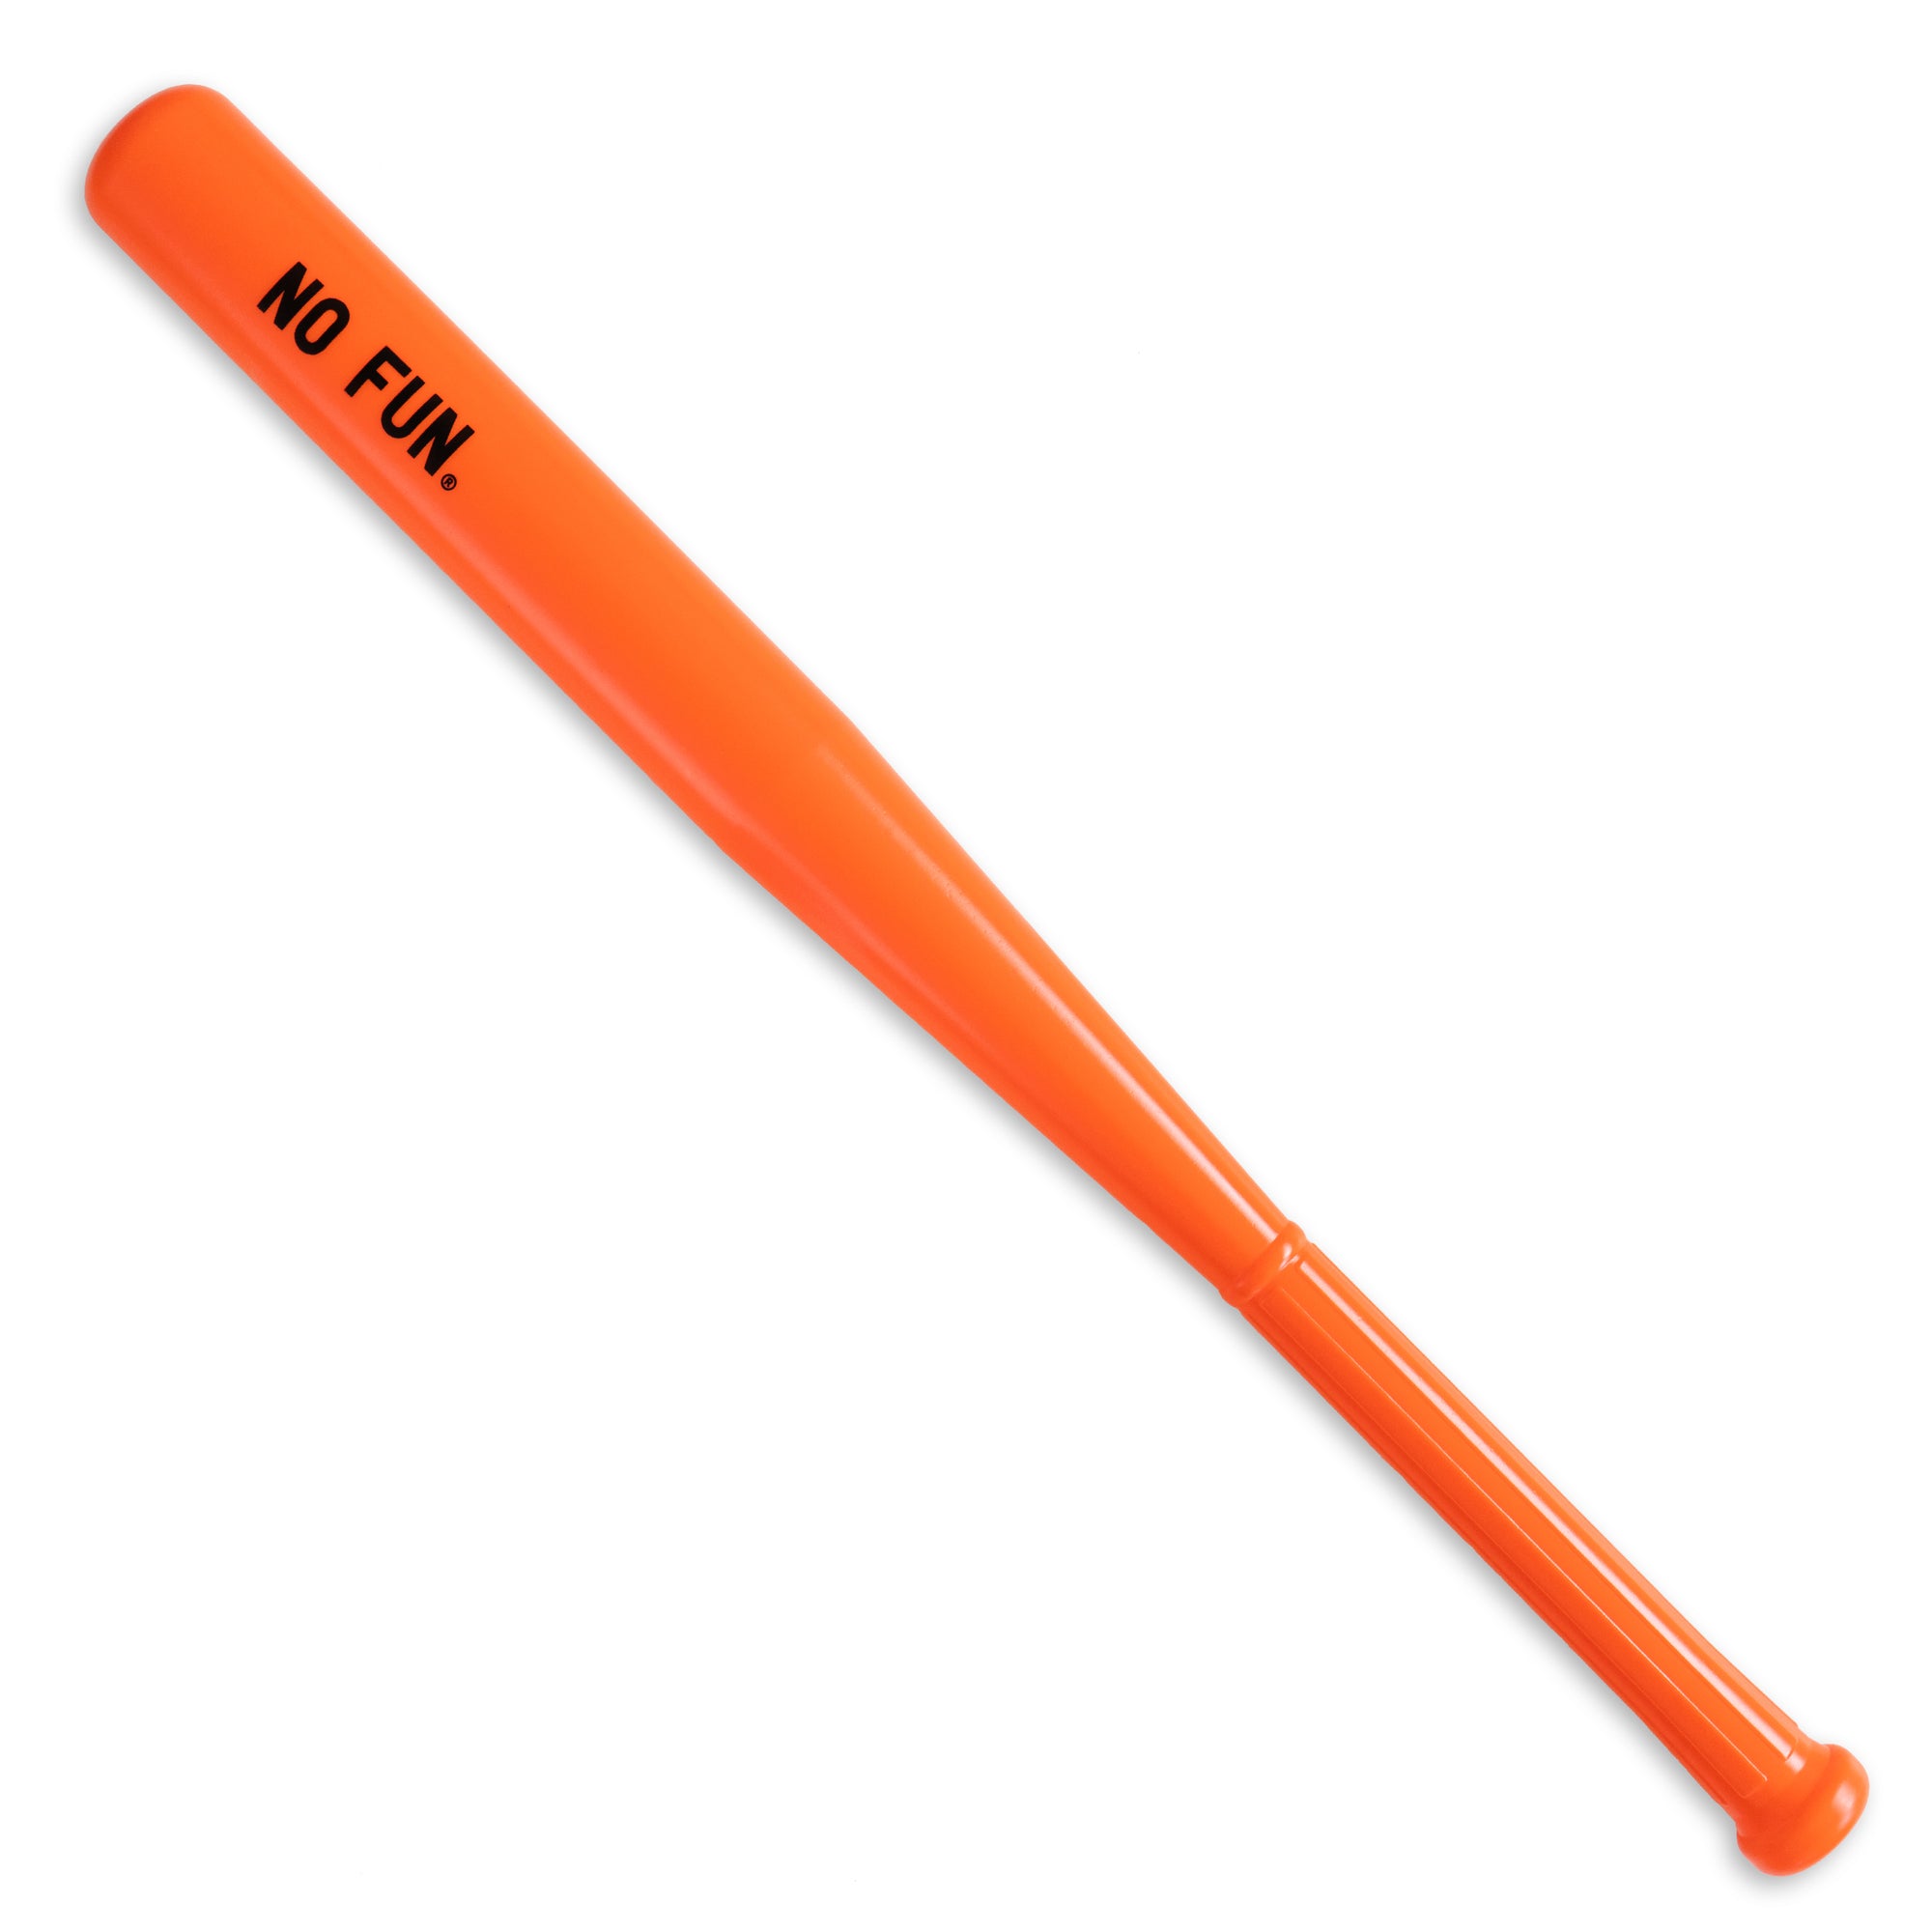 Plastic orange bat.  Looks similar to a bat used for wiffle ball.  There is a black No Fun® logo on the barrel of the bat.